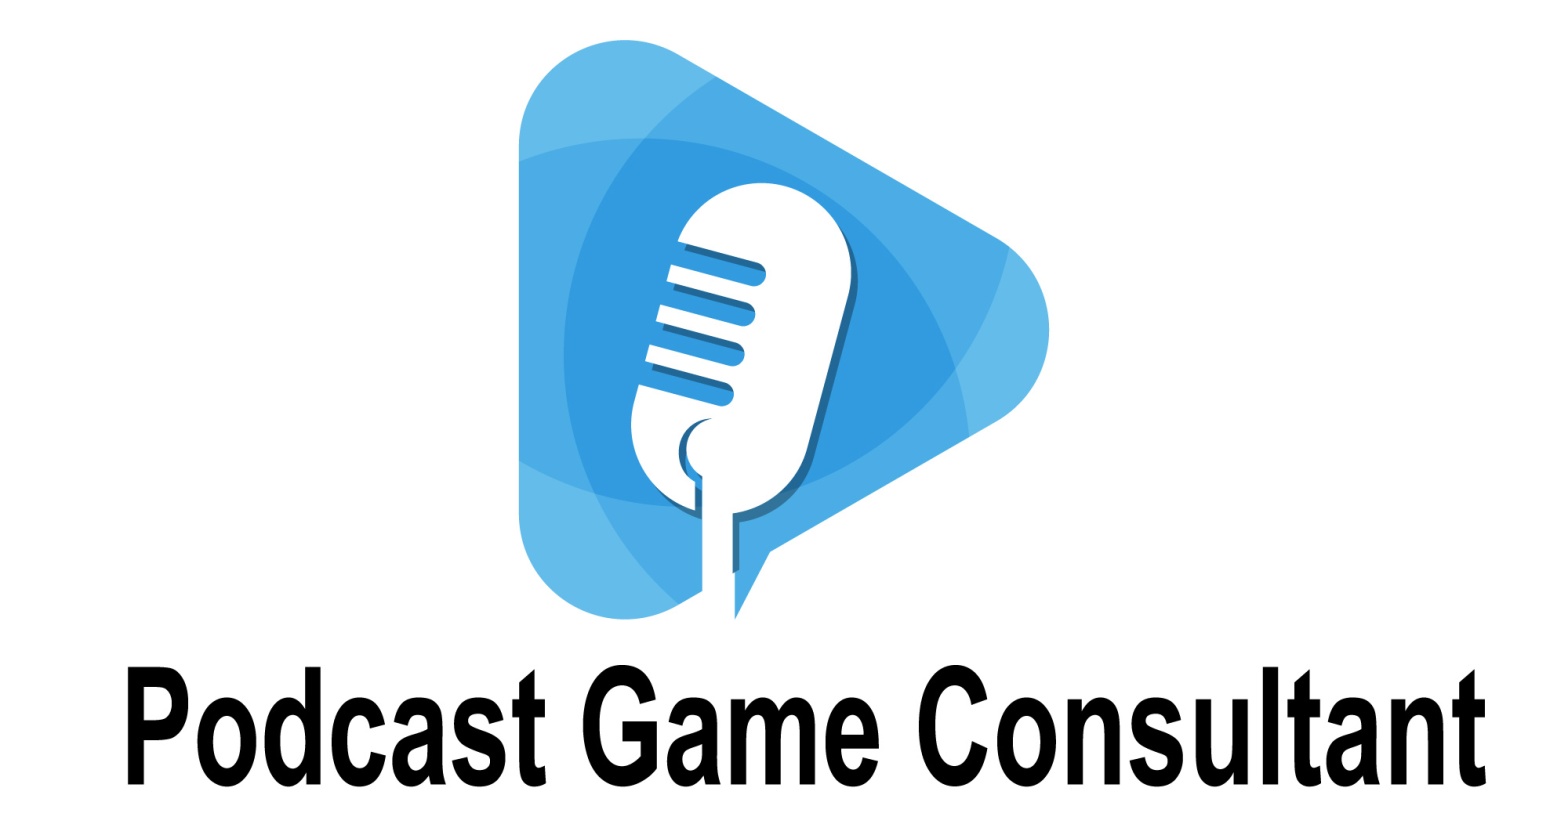 Podcast Game Consultant